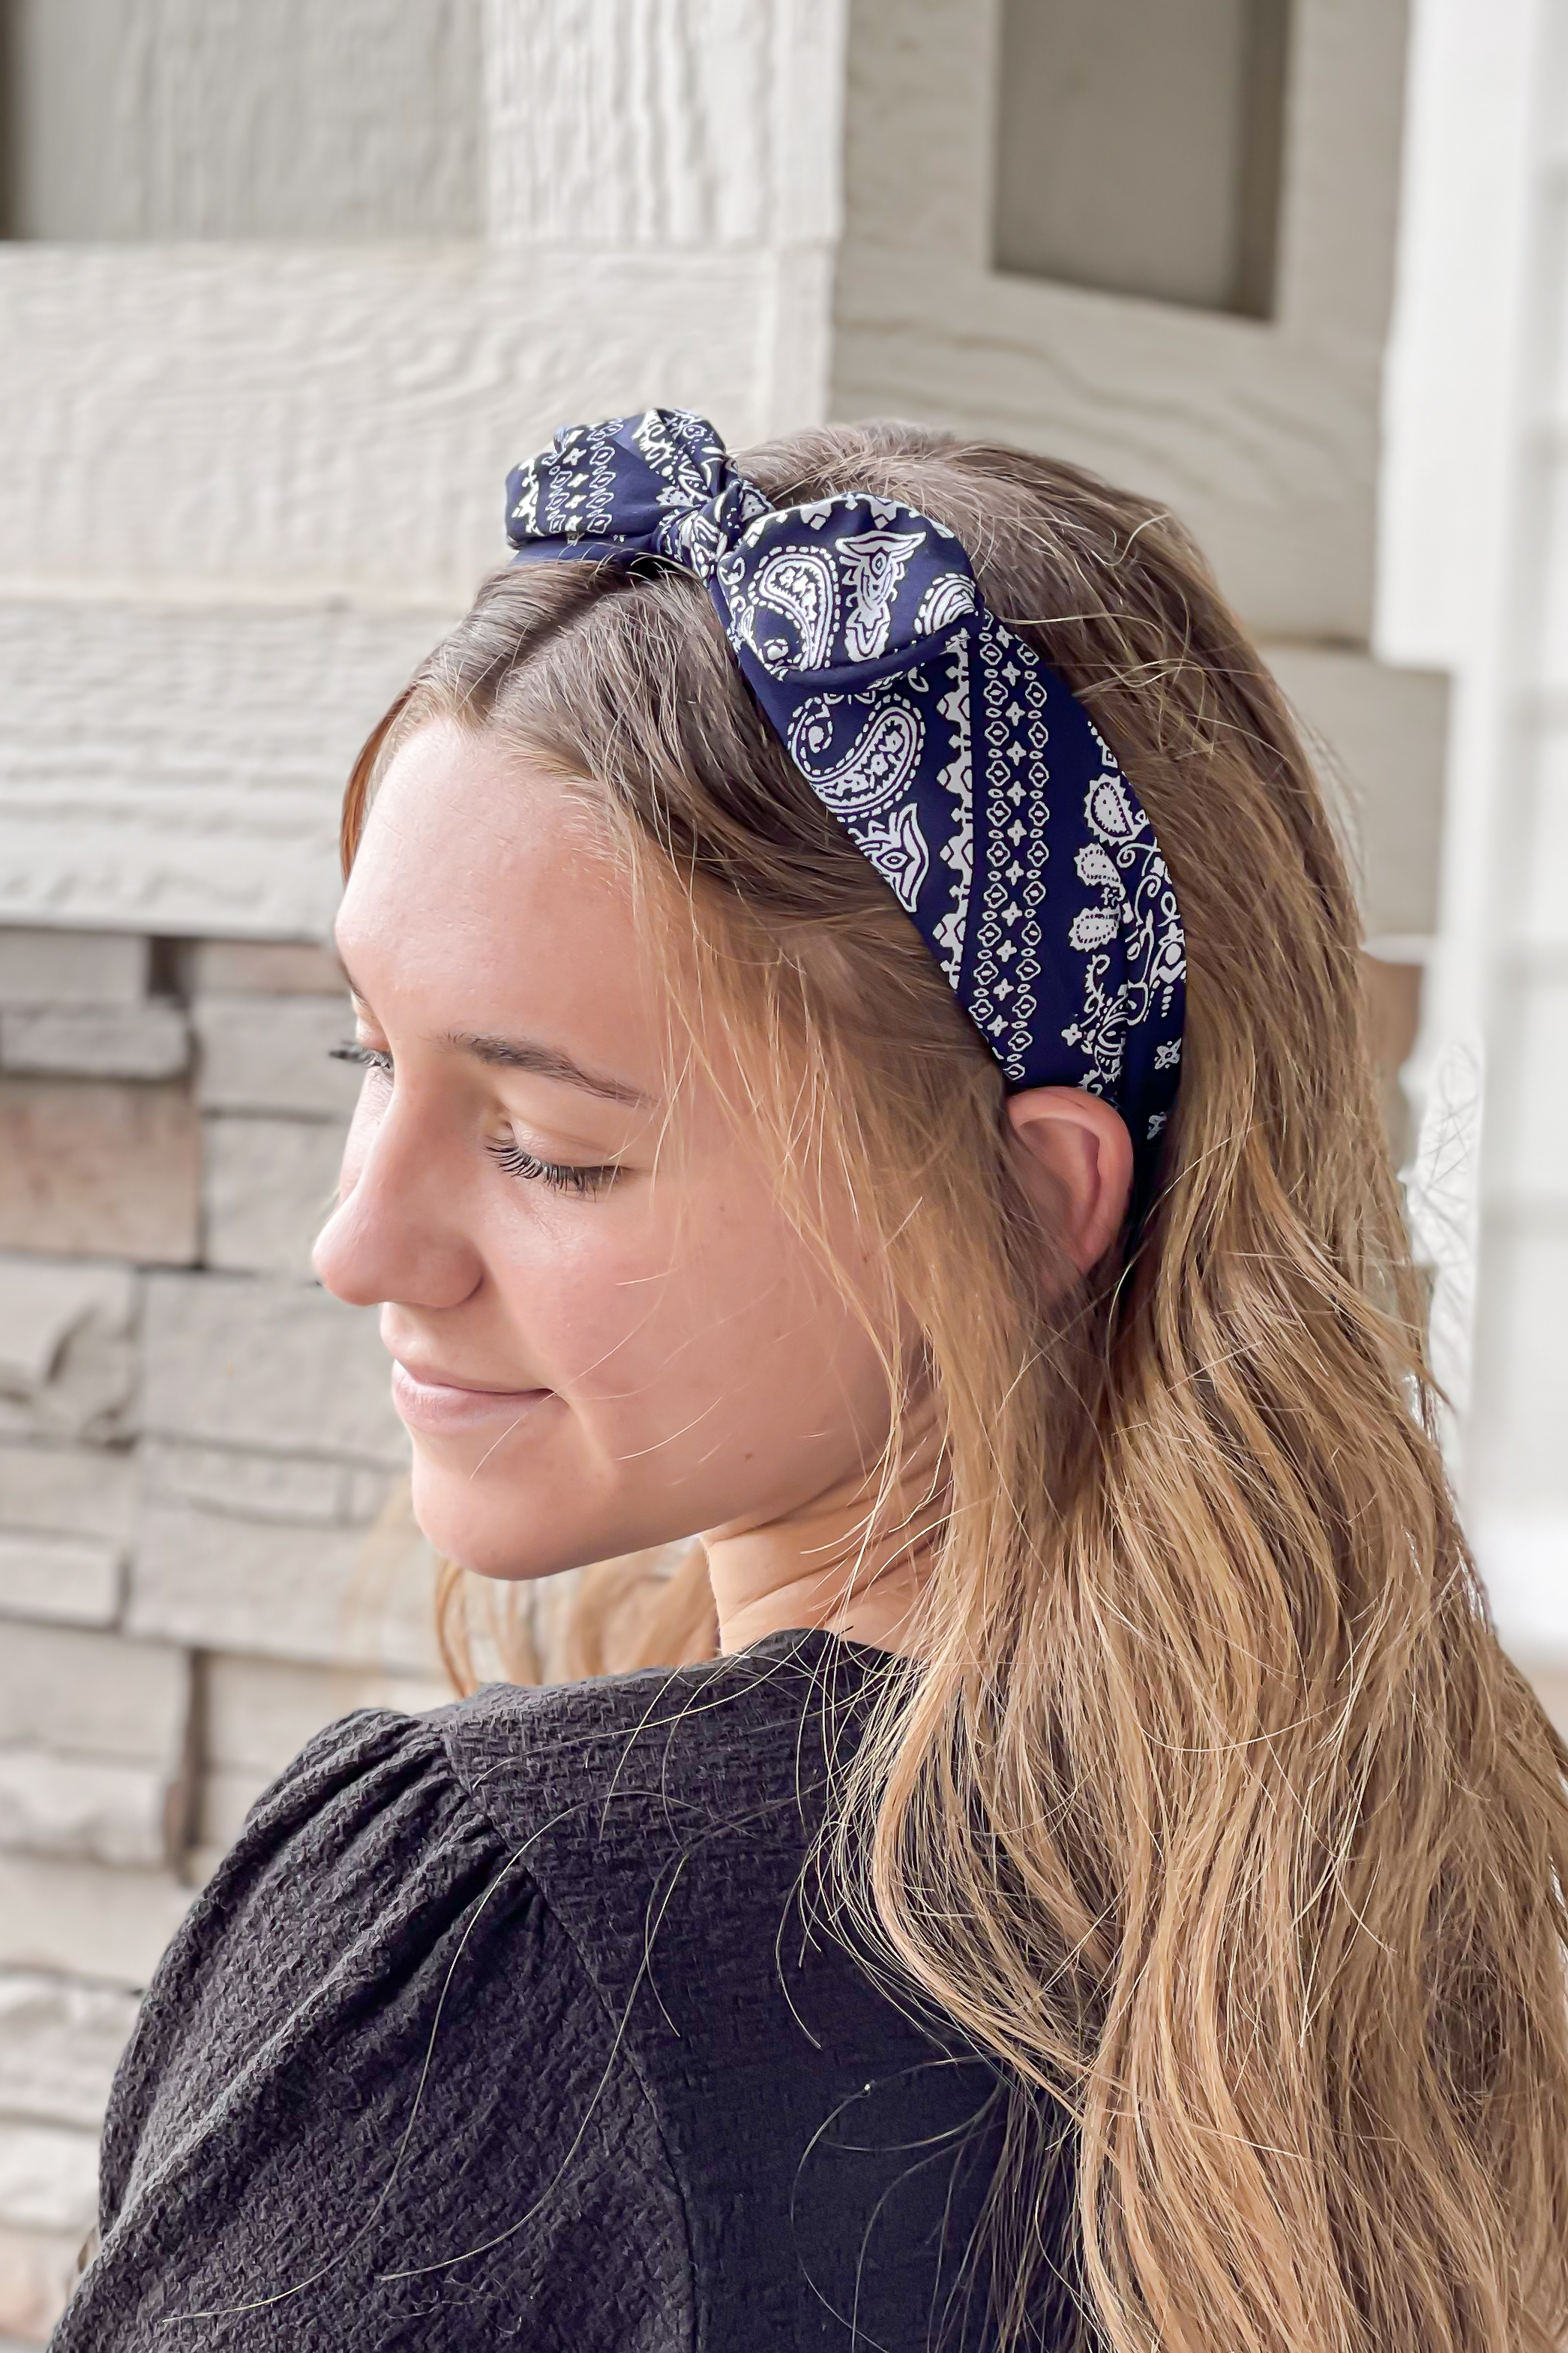 Bandana Headband with Knotted Bow - All Sales Final